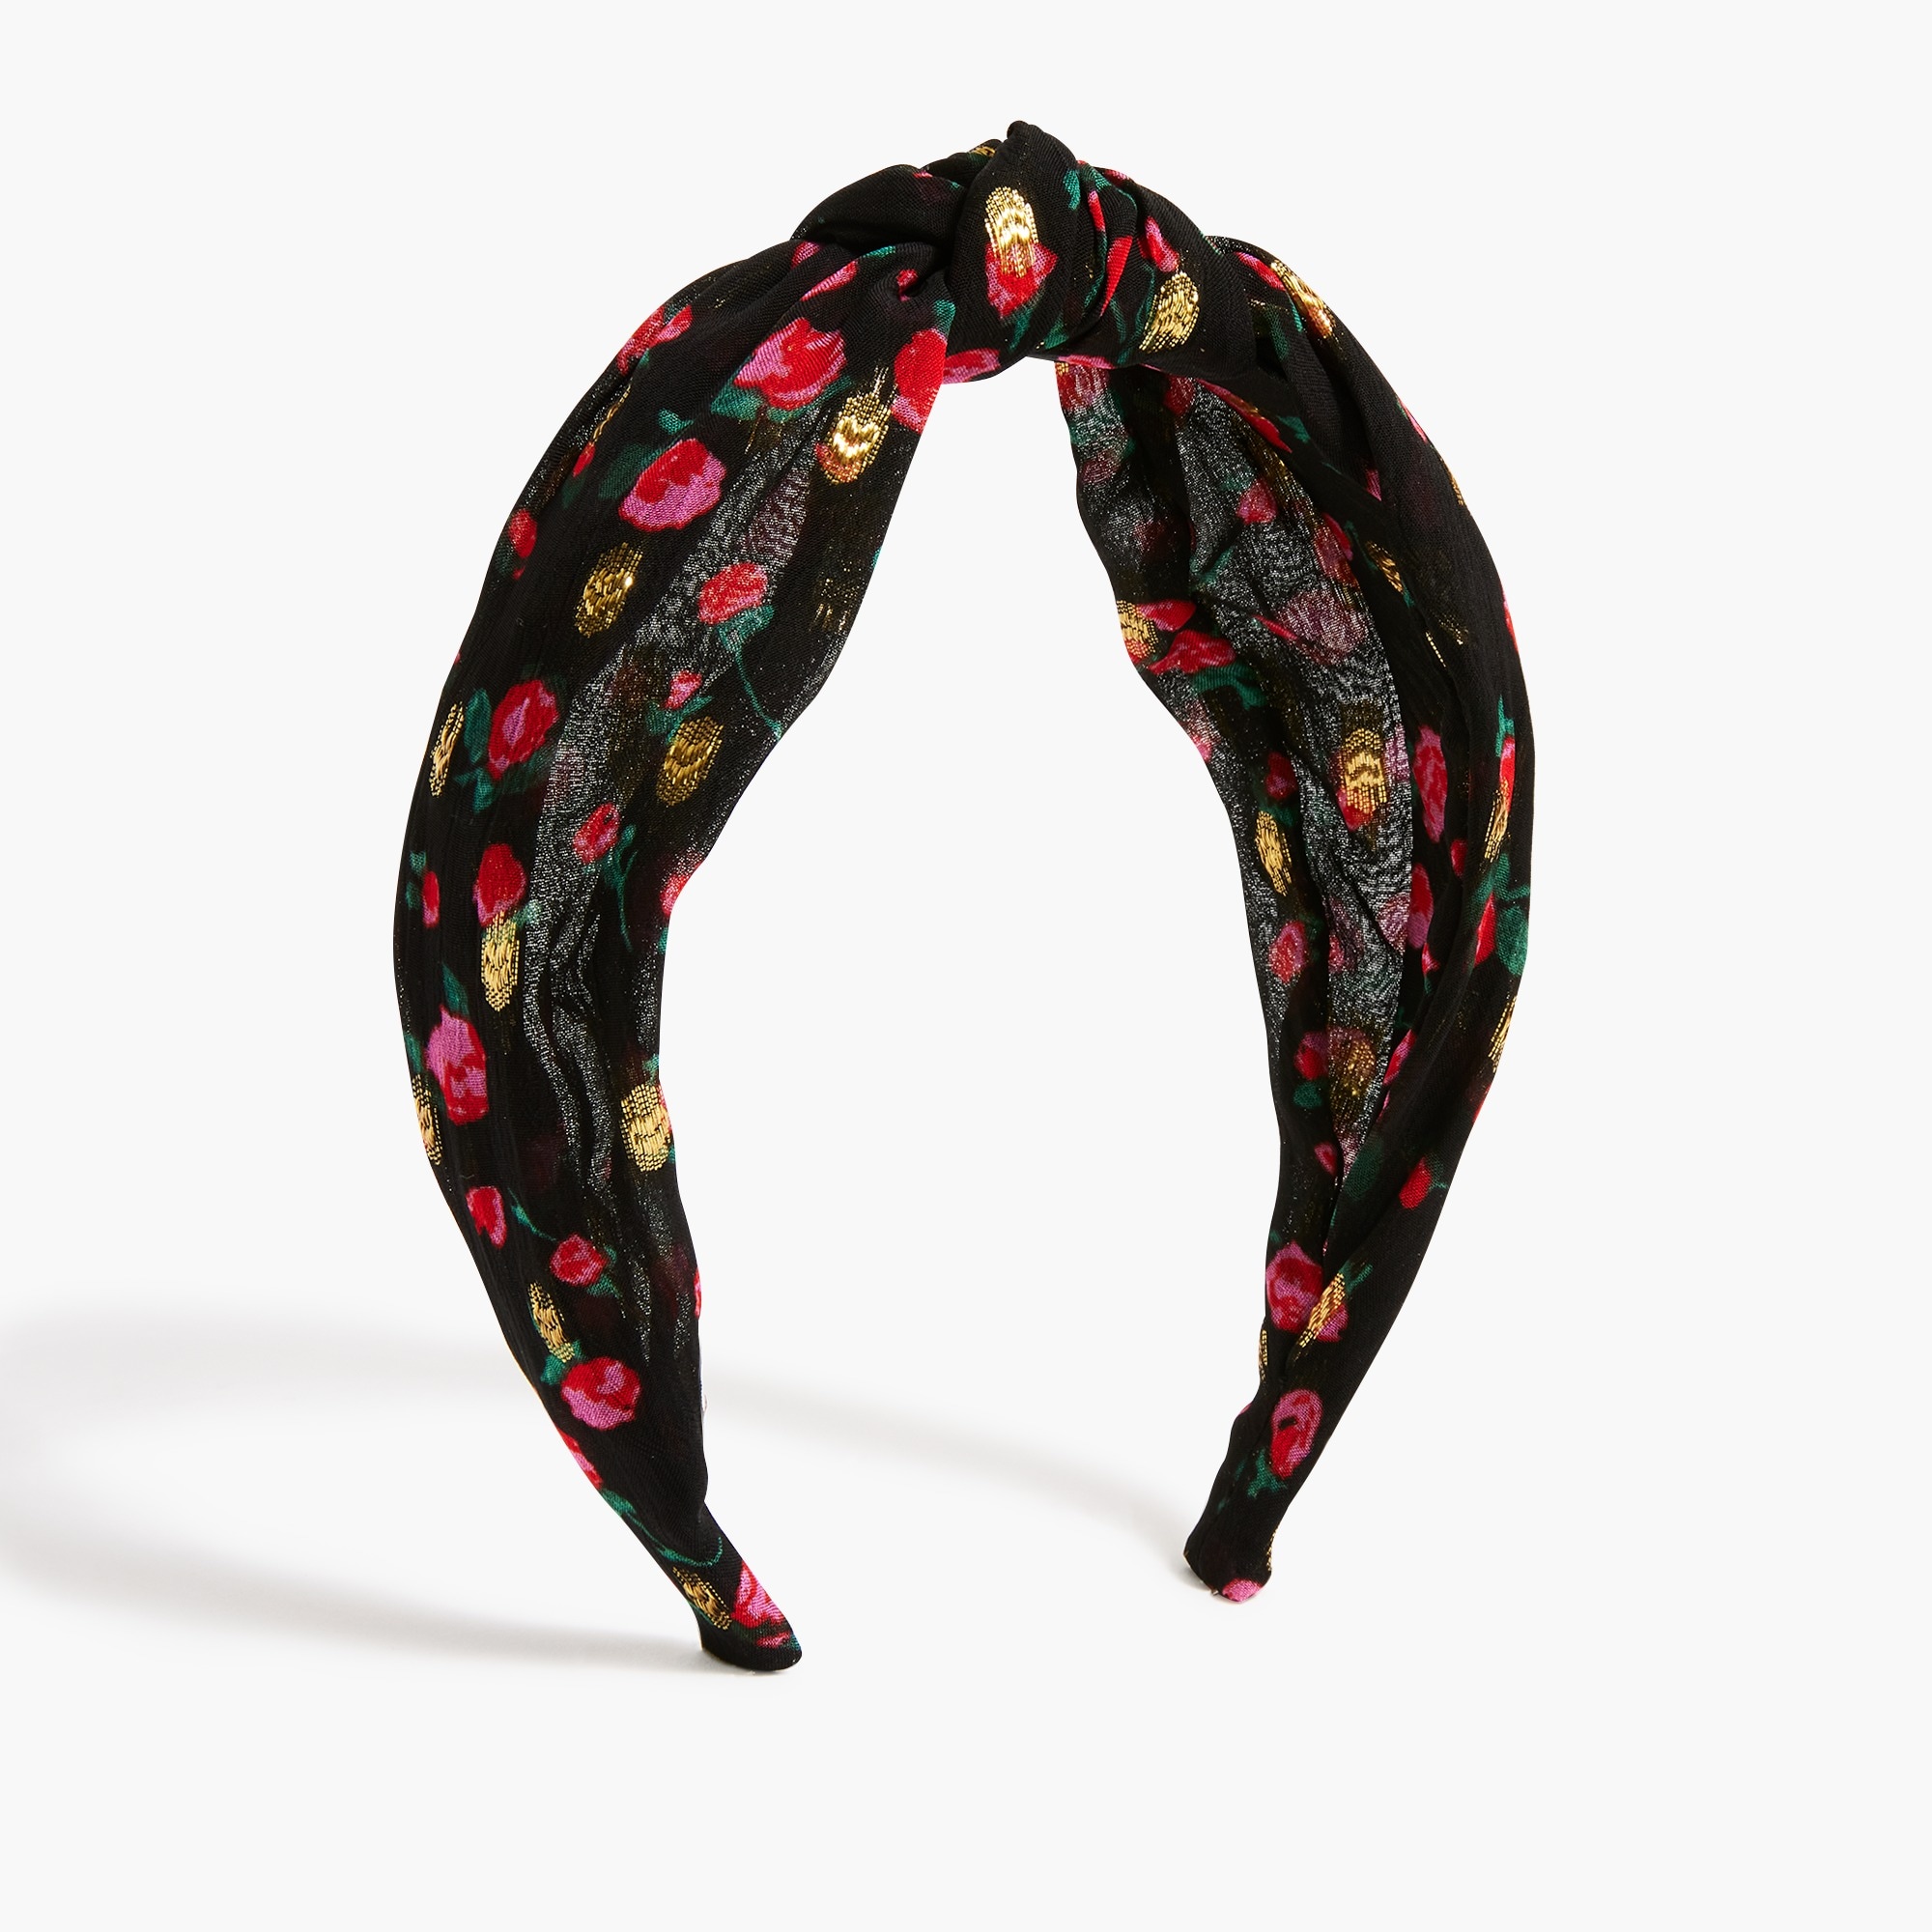 Jcrew Floral knotted headband